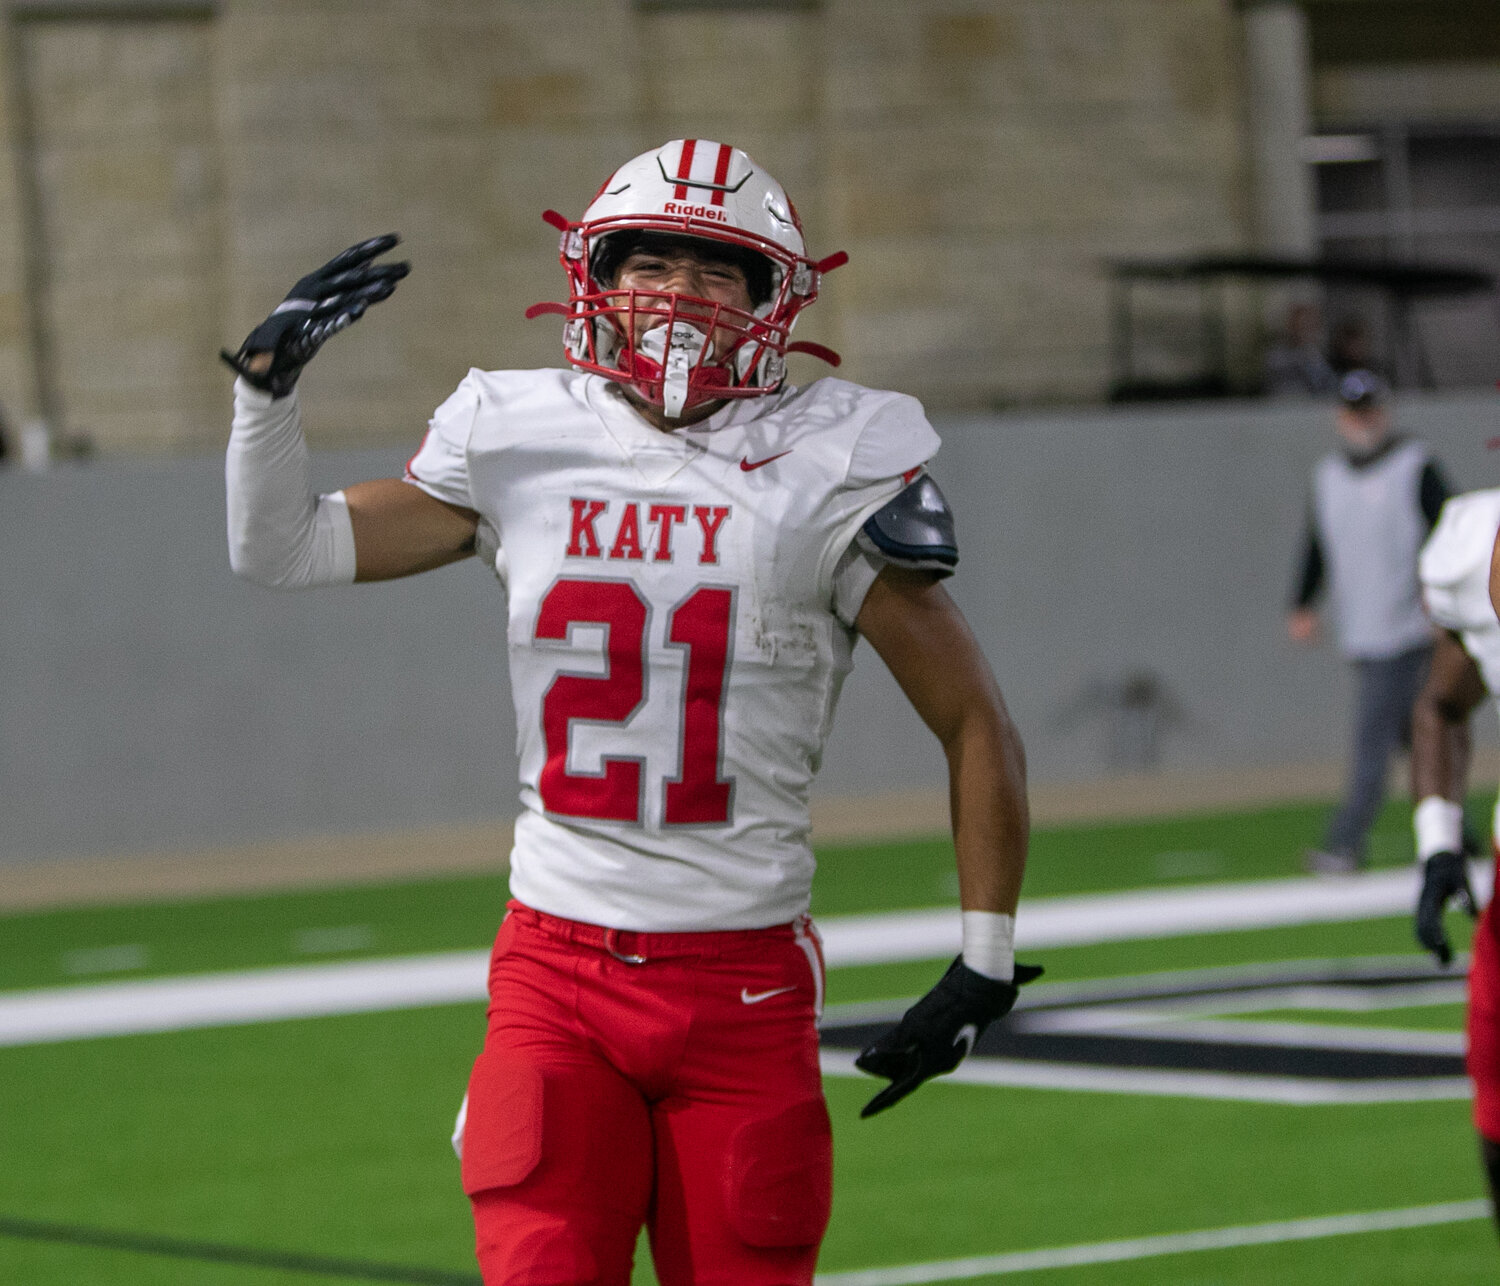 Joshua Garcia celebrates after recovering a fumble during Friday's area round game between Katy and Cy-Fair at the Berry Center in Cypress.